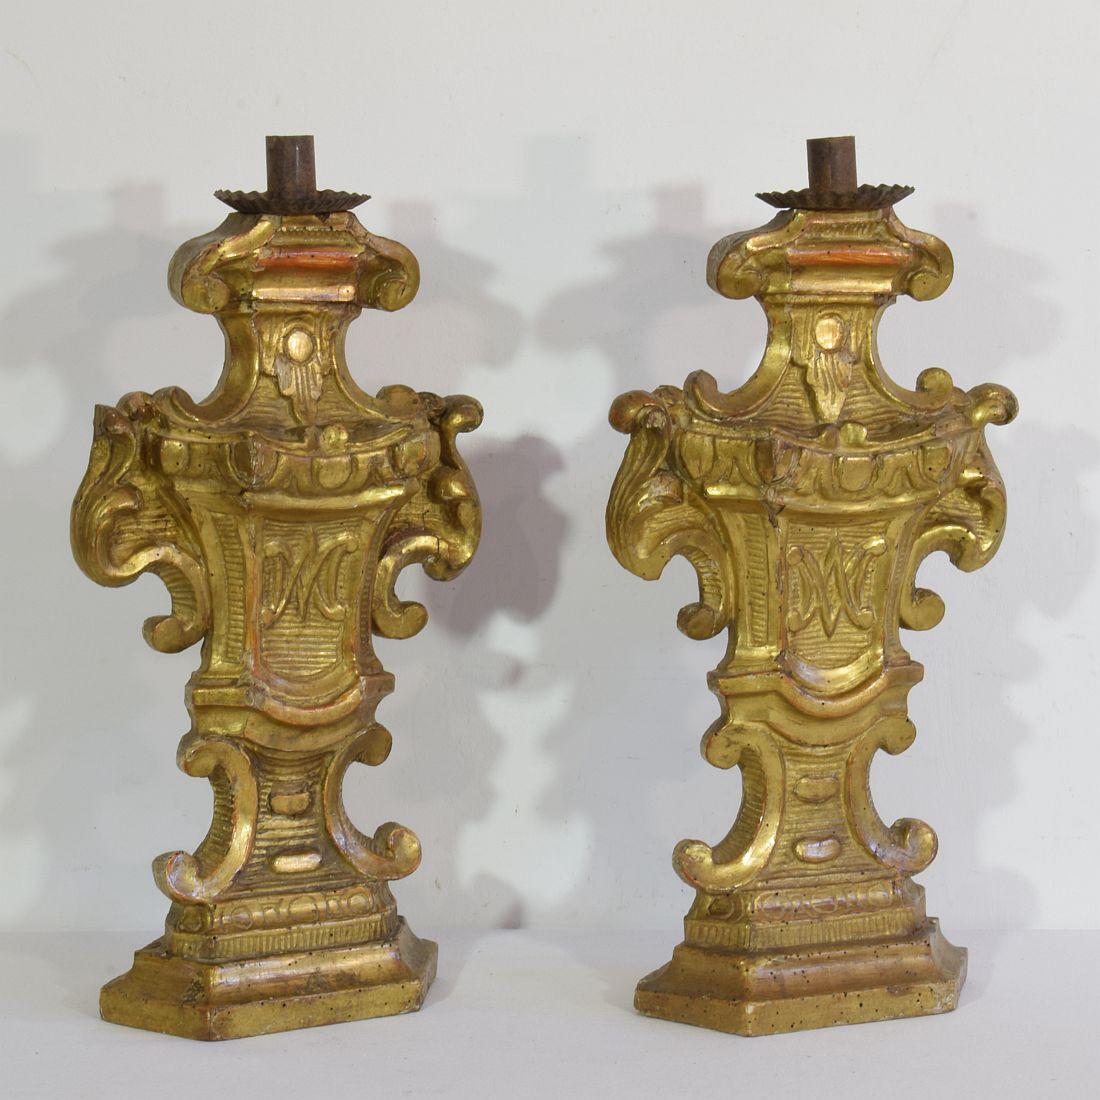 Pair of 18th Century Italian Carved Giltwood Baroque Candleholders In Good Condition For Sale In Buisson, FR